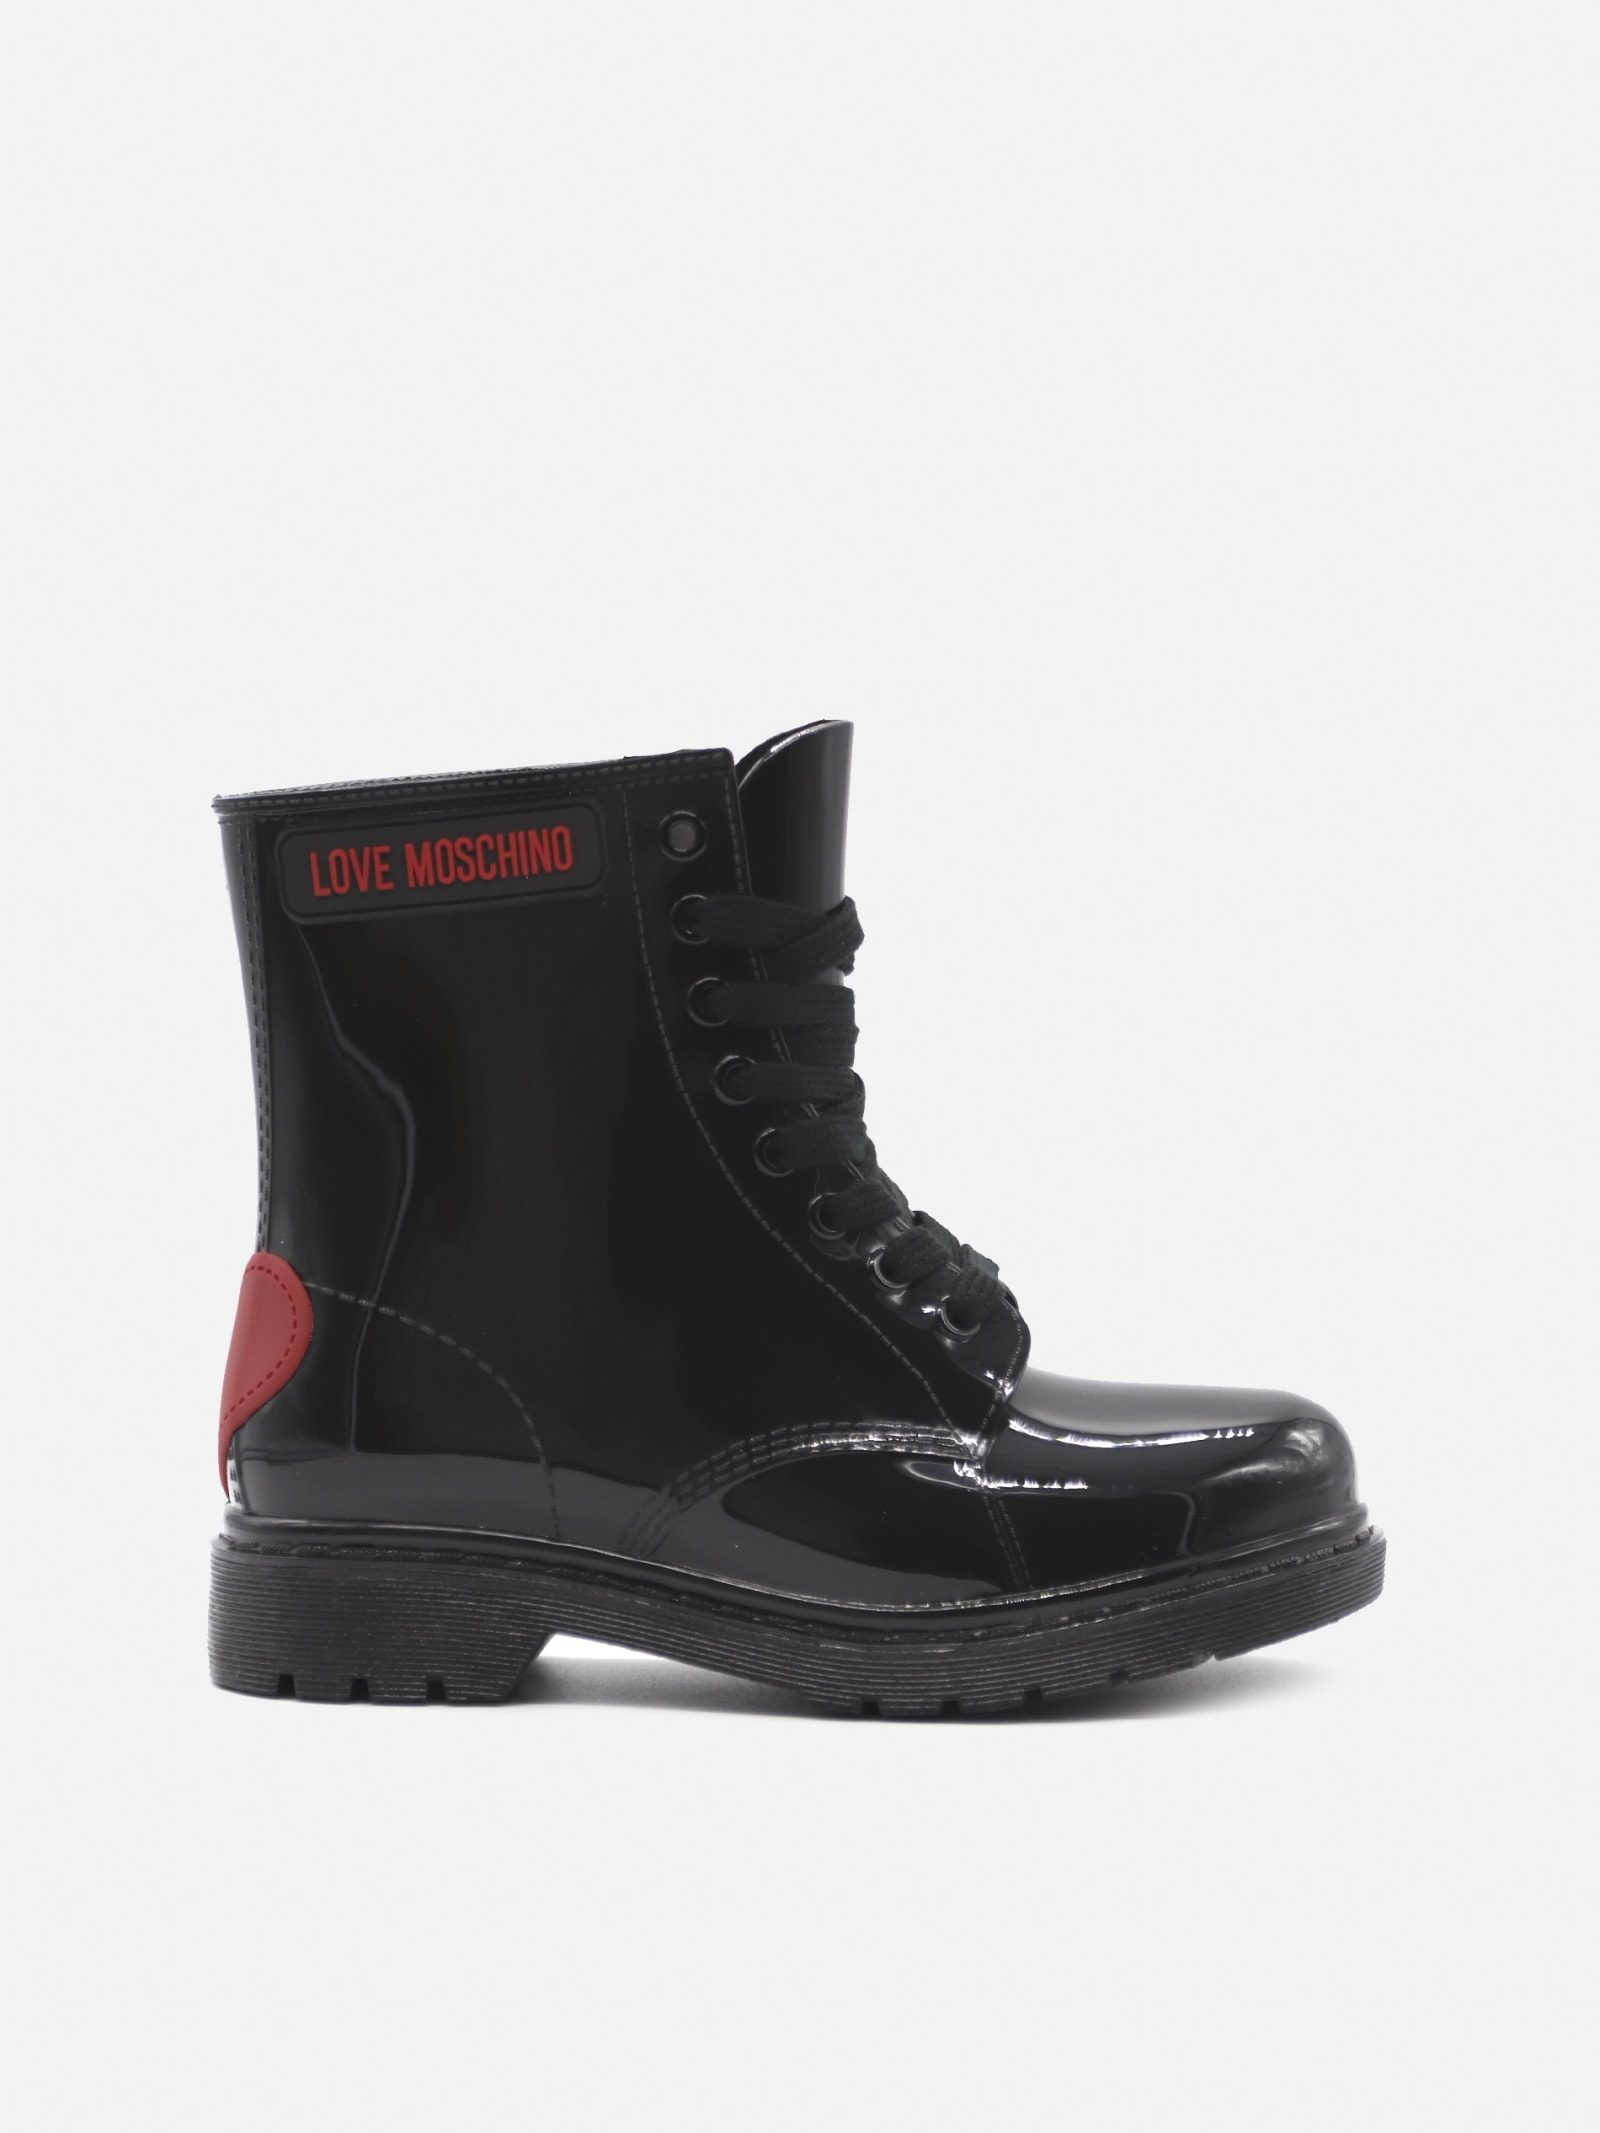 Buy Love Moschino Lace-up Boots In Glossy Finish With Logo Patch online, shop Love Moschino shoes with free shipping